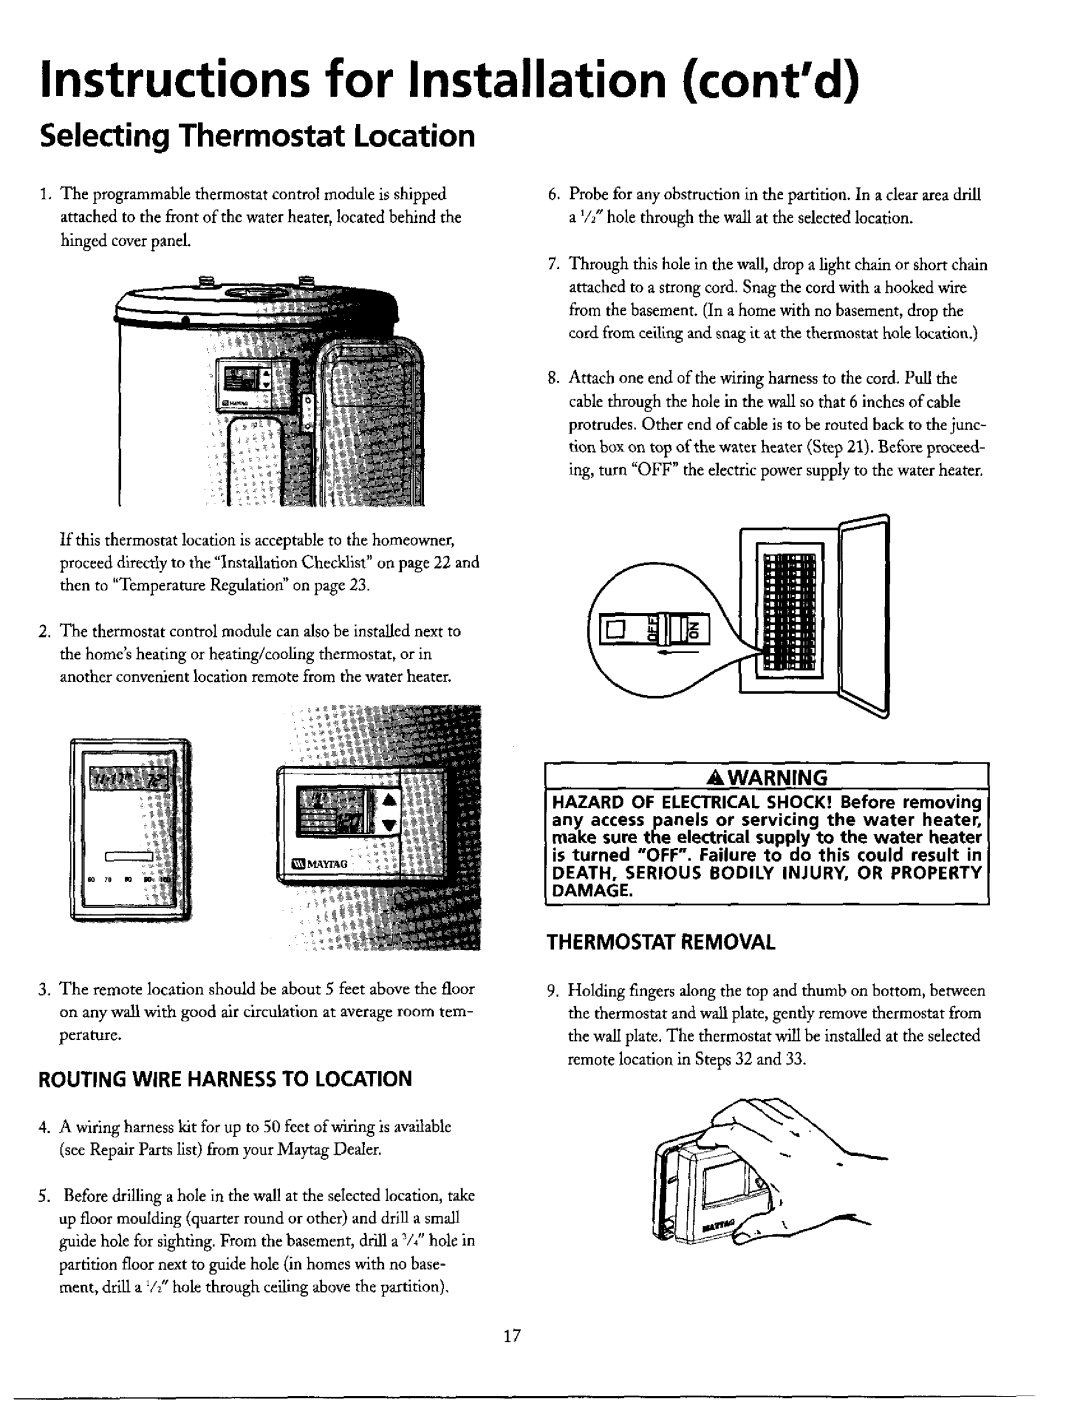 Maytag HE21282PC Selecting Thermostat Location, Instructions for Installation contd, Routingwireharnesstolocation 